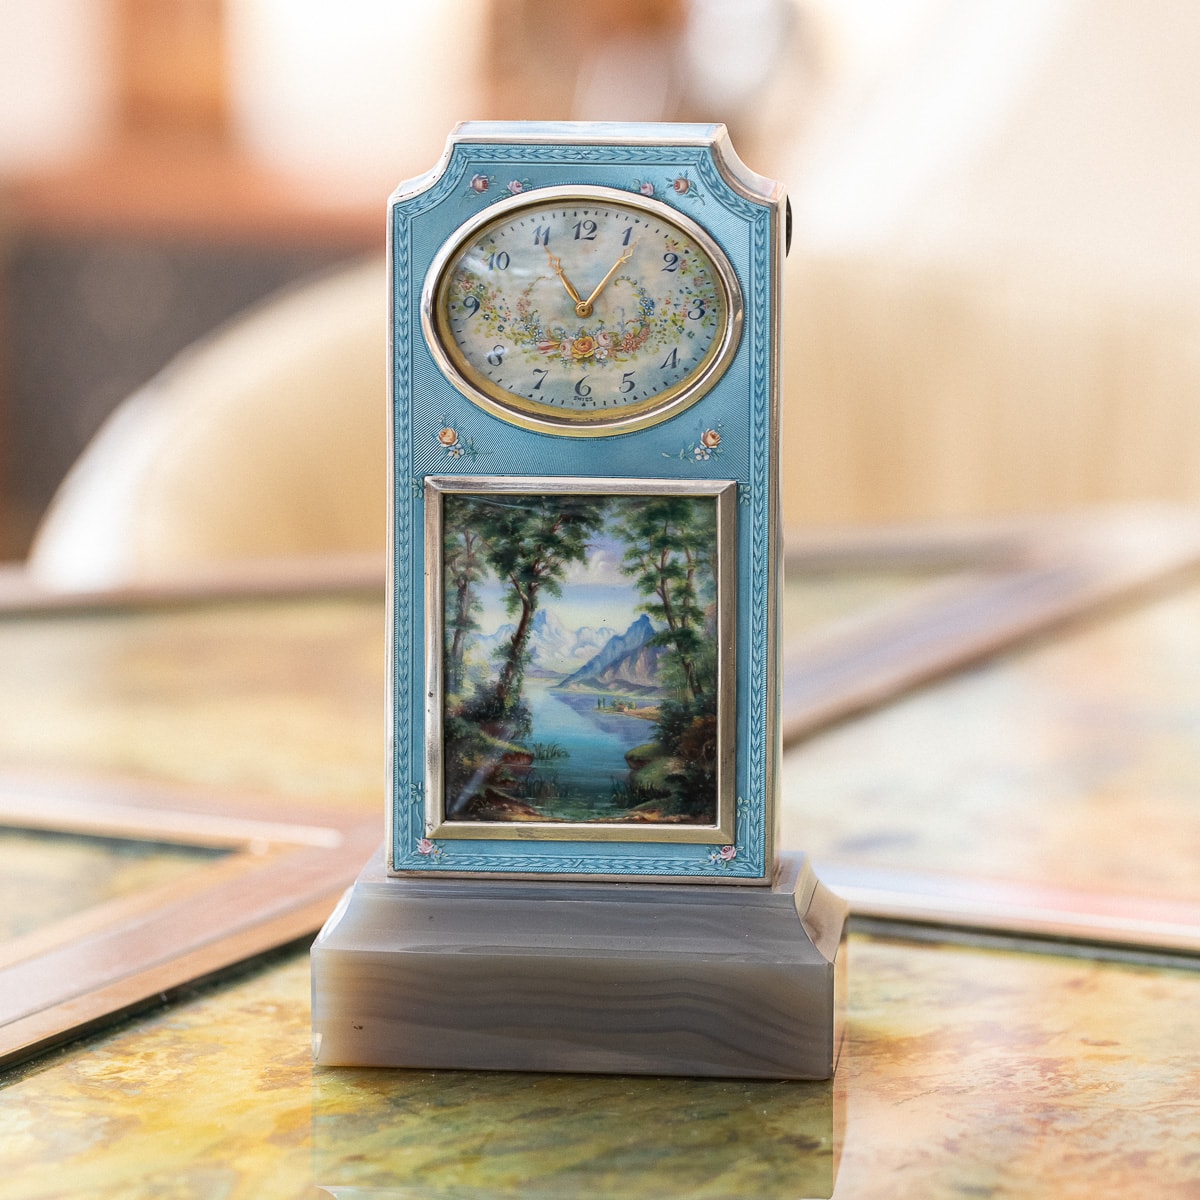 A FINE EARLY 20TH CENTURY SWISS SOLID SILVER AND GUILLOCHE ENAMEL TRAVEL CLOCK IN DISPLAY CASE - Image 55 of 62